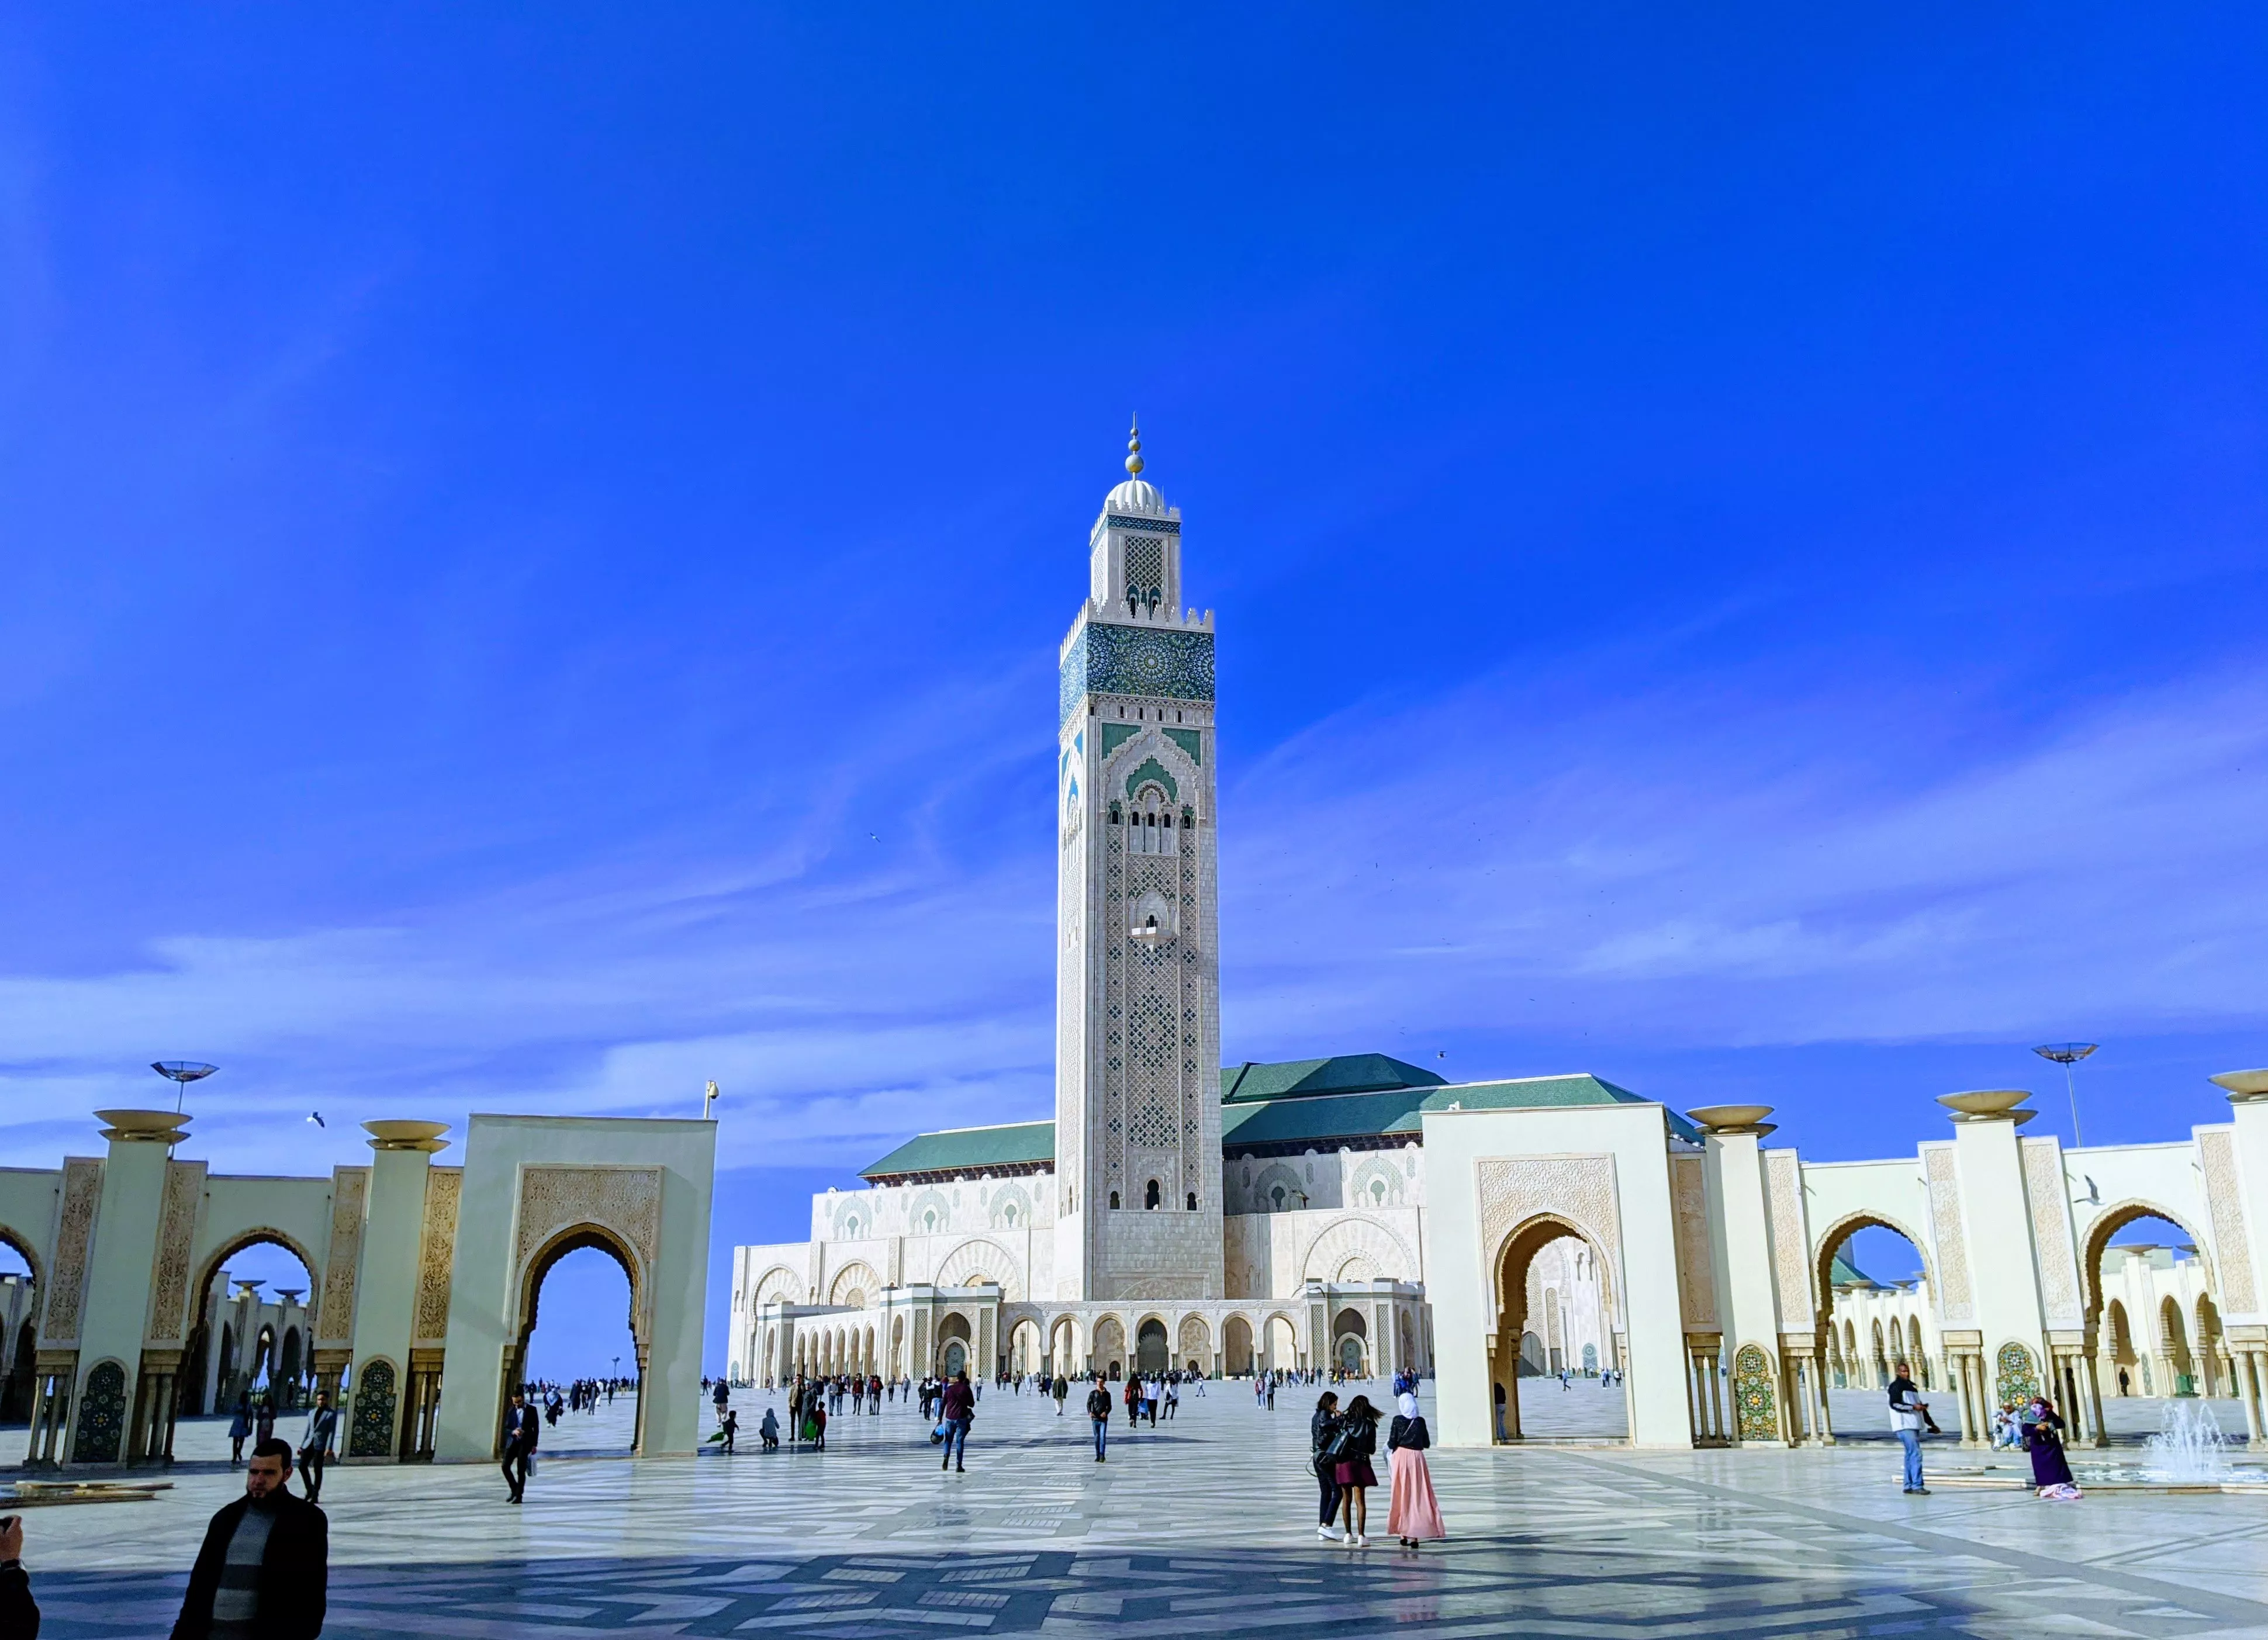 Hassan II Mosque in Morocco, Africa | Architecture - Rated 4.1